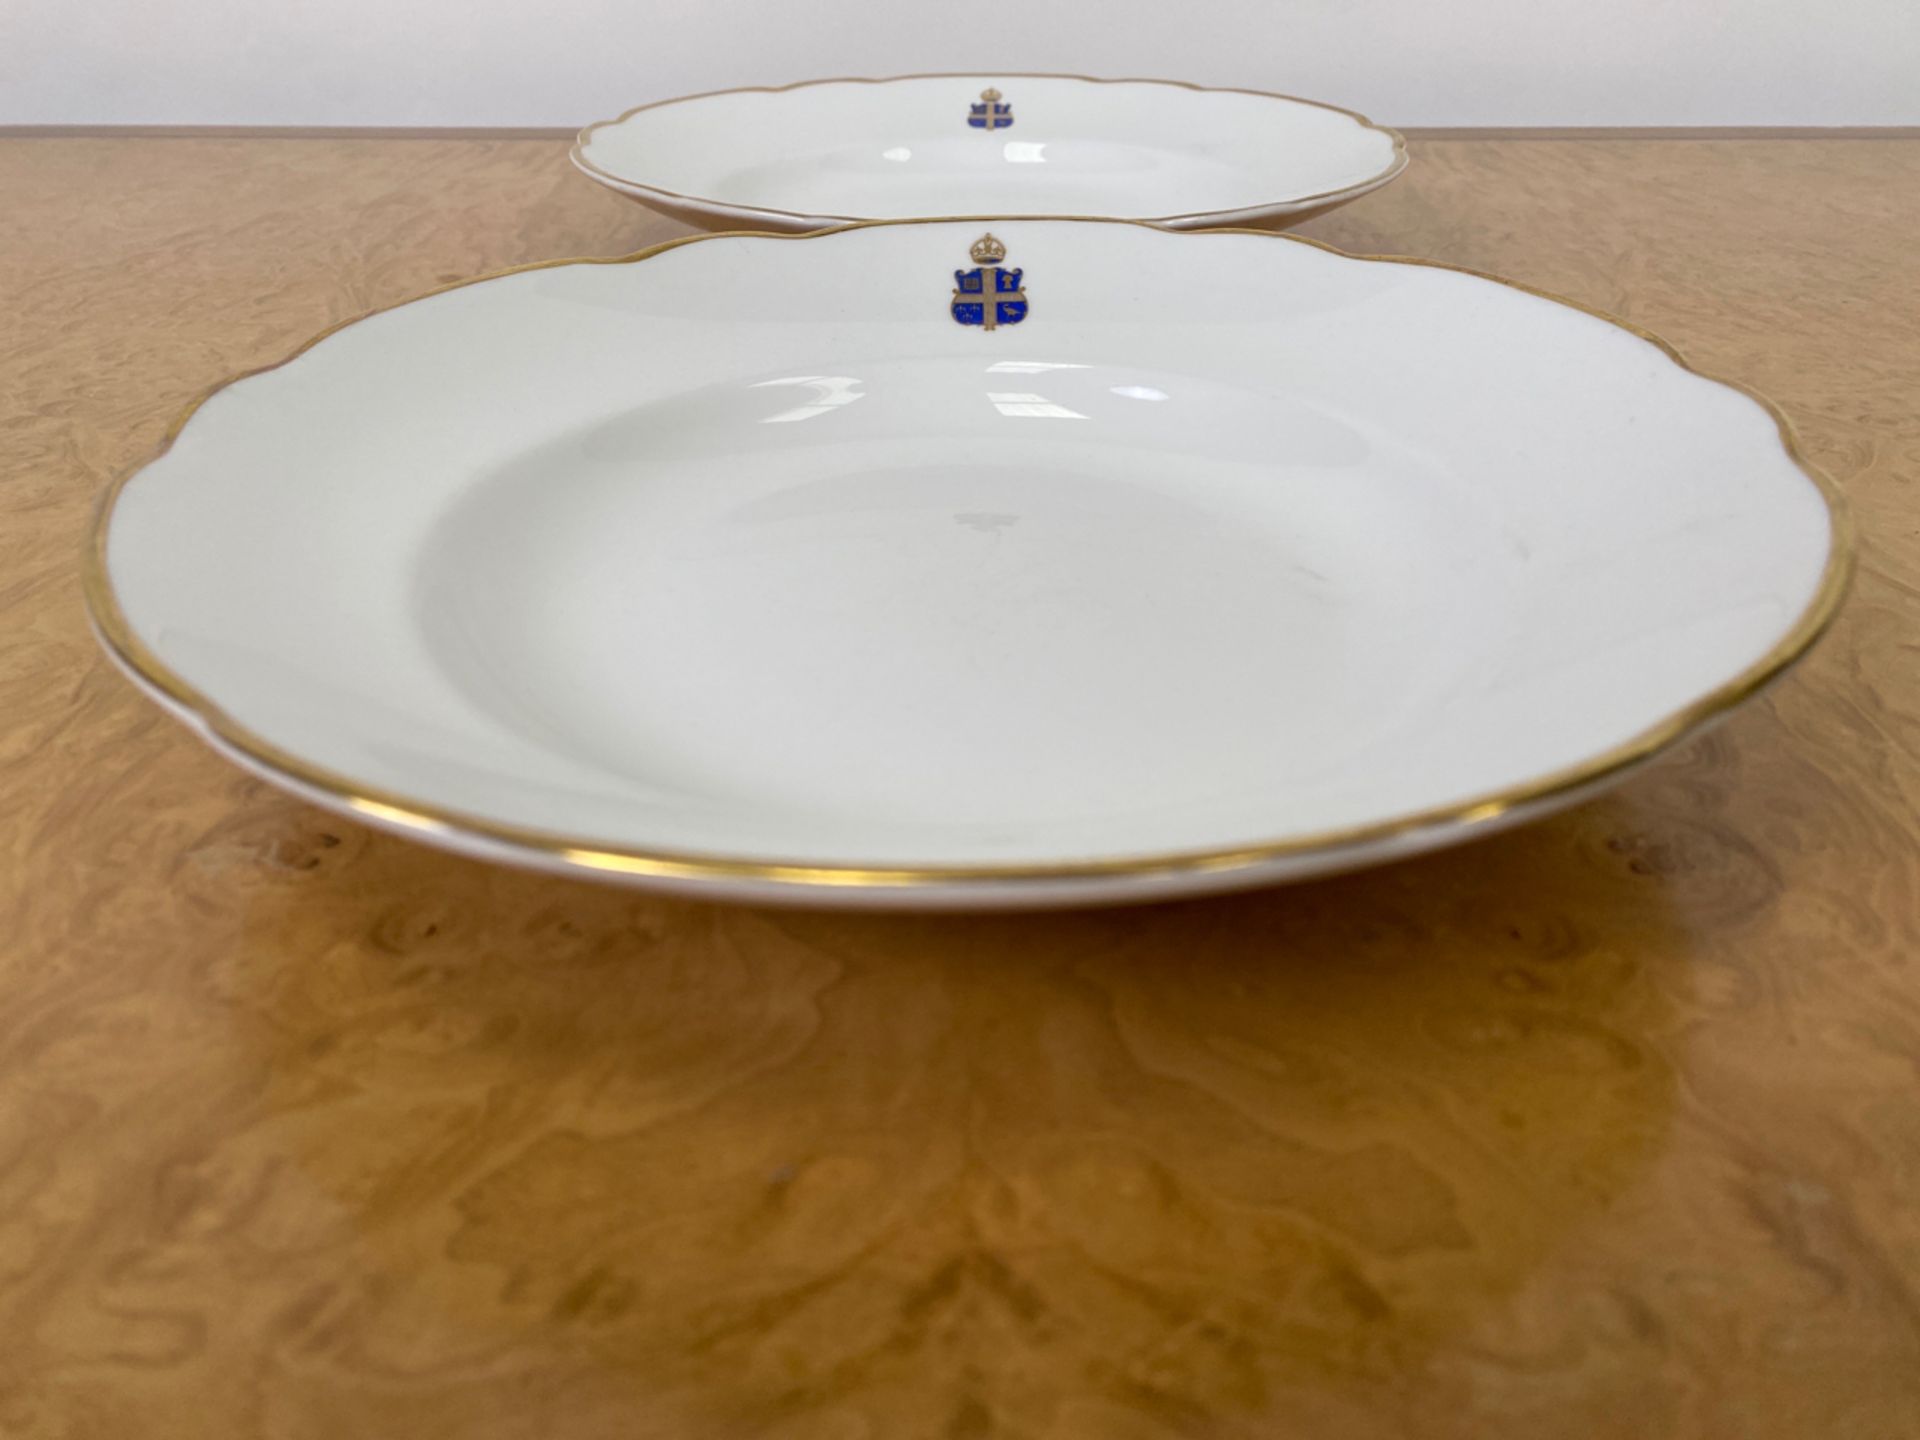 Set of Crested Crockery for Claridge's by Chommette 1884 - Image 32 of 36